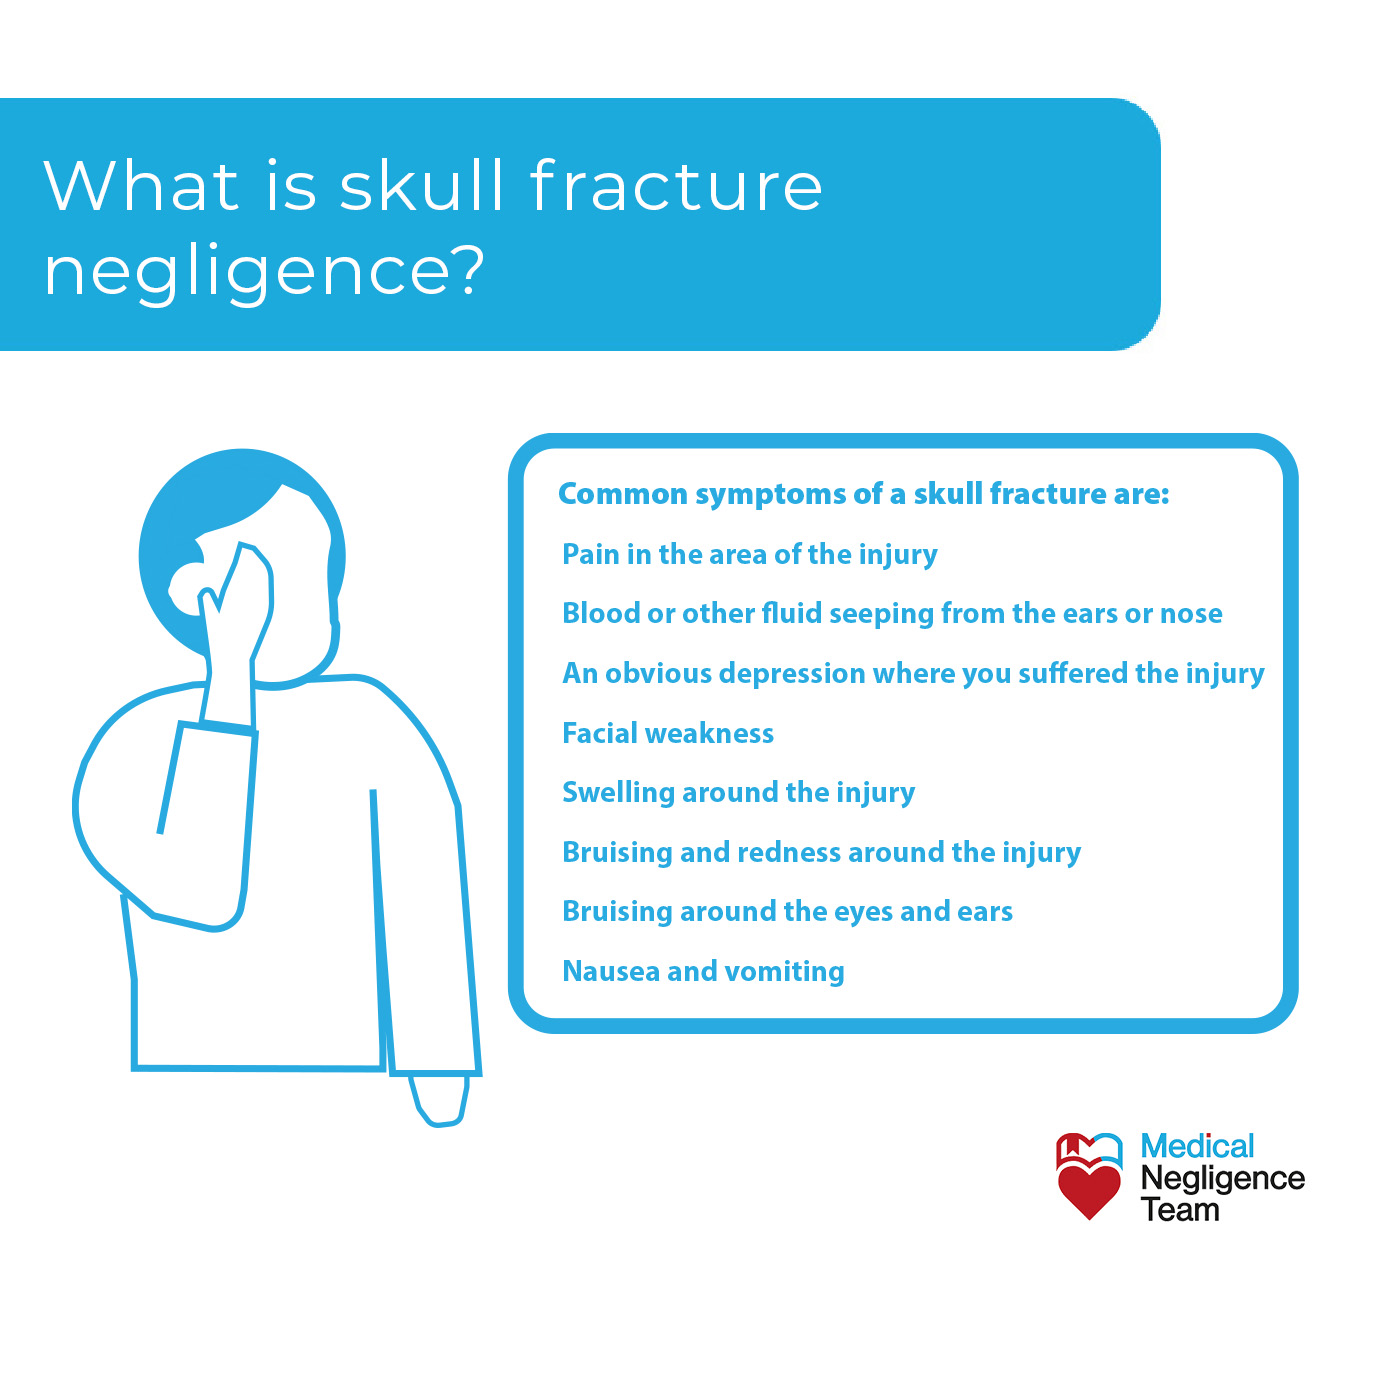 Common symptoms of a skull fracture